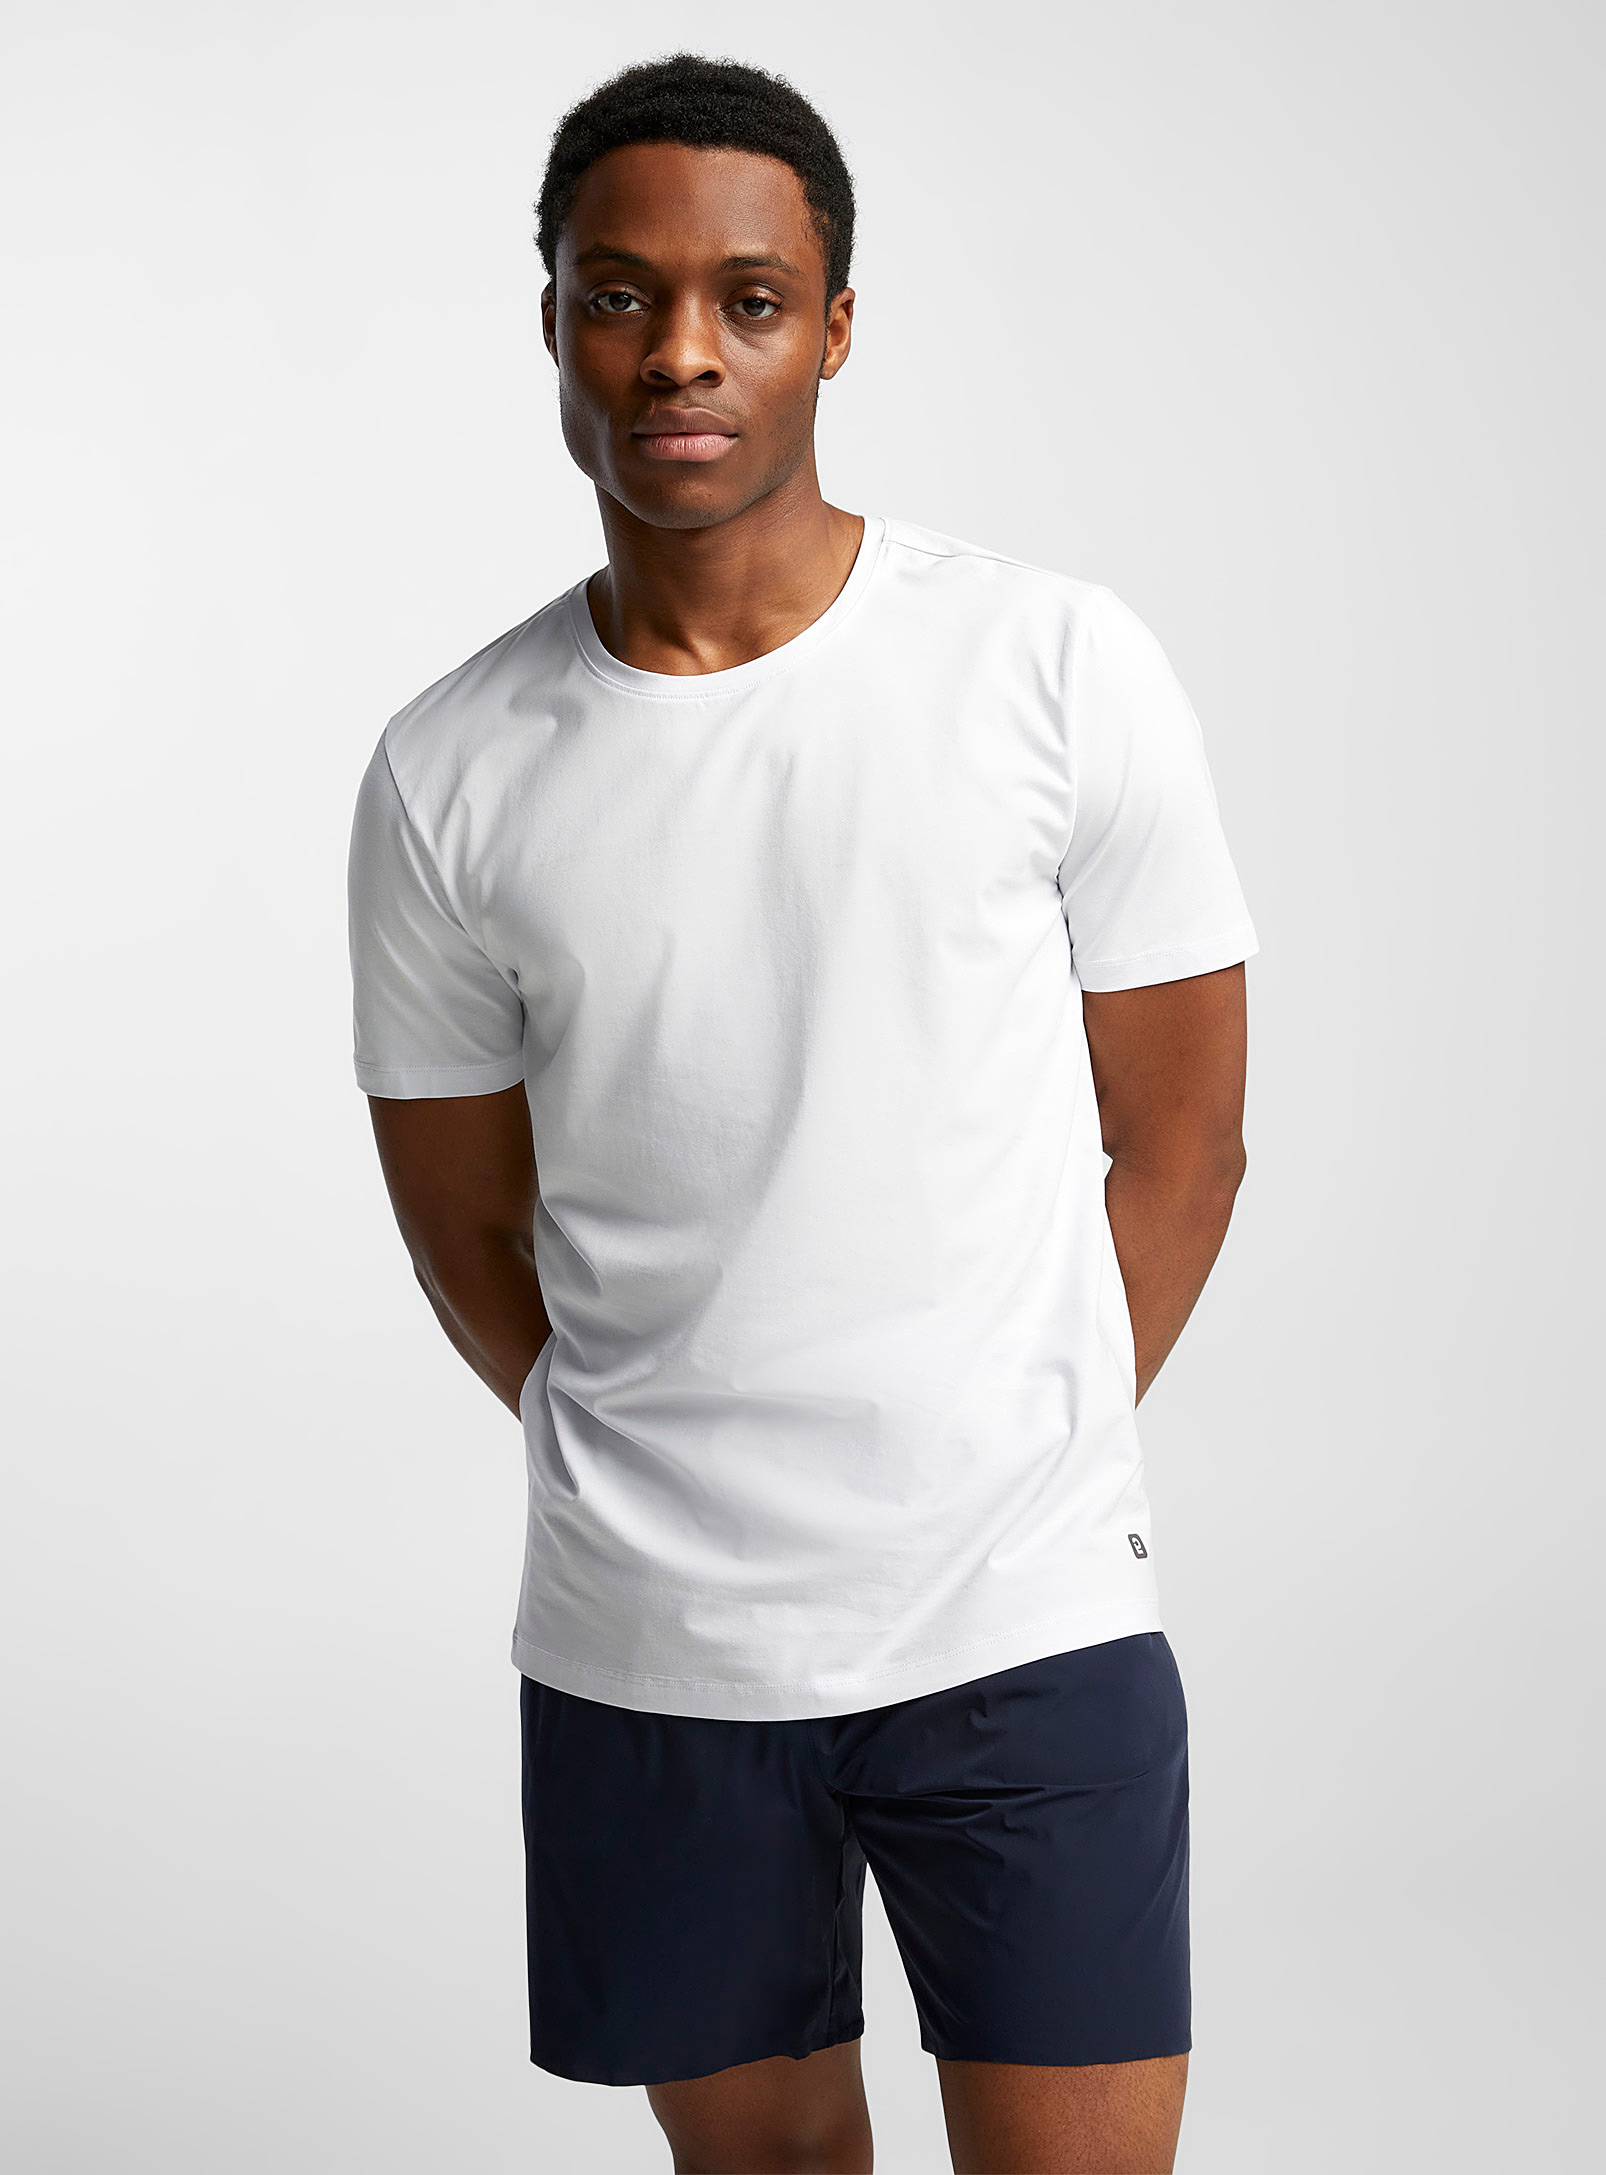 I.fiv5 Cotton-lyocell Stretch Tee In White